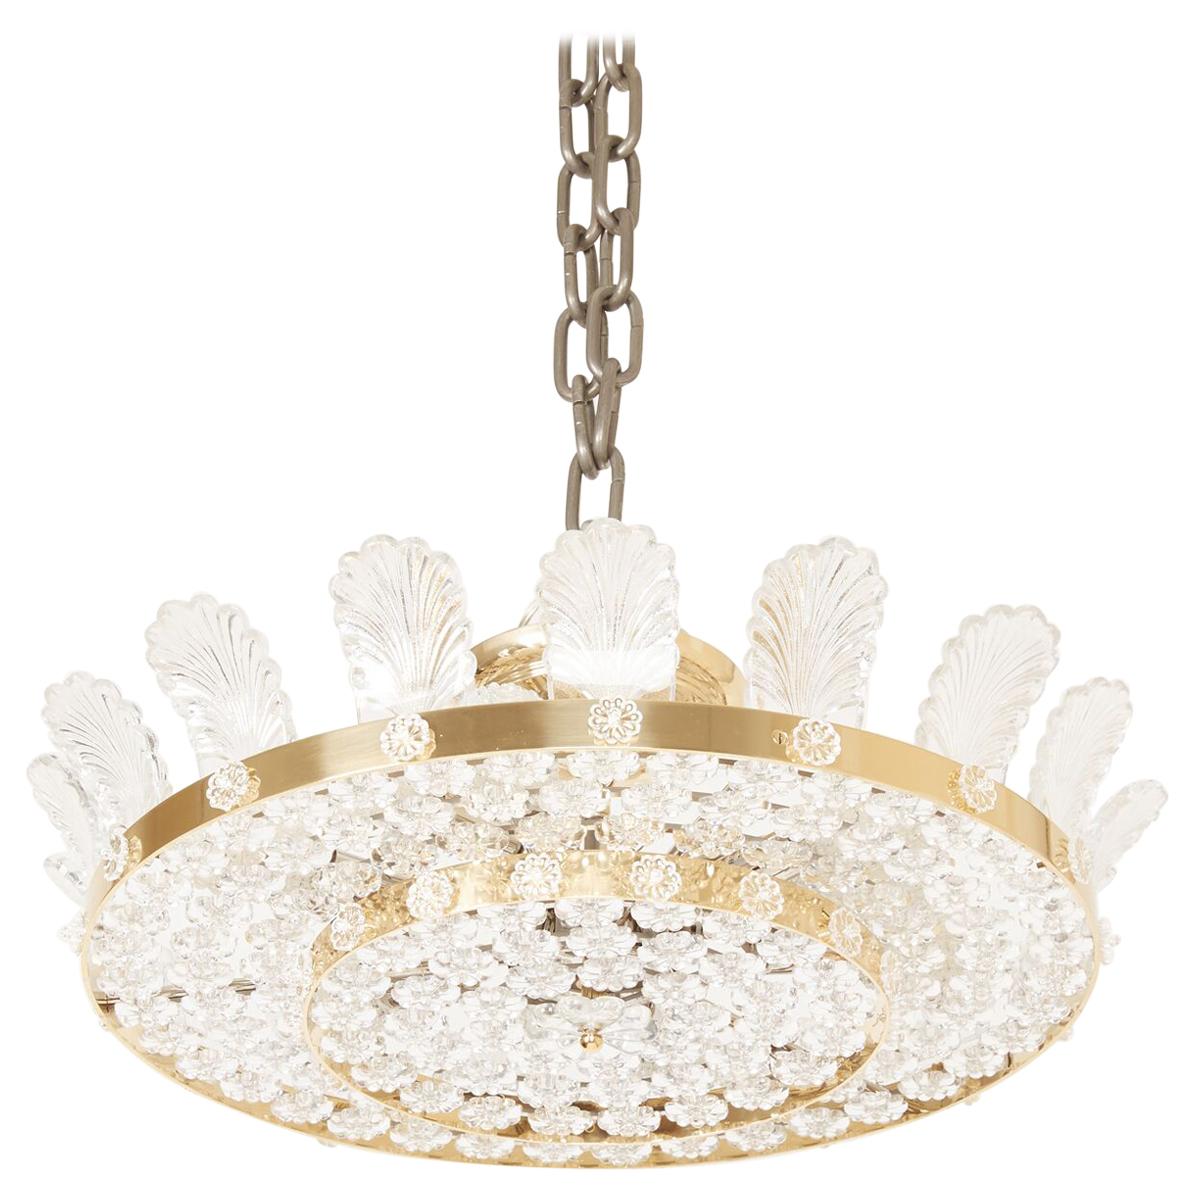 The 2-tiered Decazes beaded flush-mount fixture, the underside formed by a steel frame grid with concentric rings covered by oversized crystal rosettes with beaded centre, insert encircled by polished brass frame having spaced rosette decorations